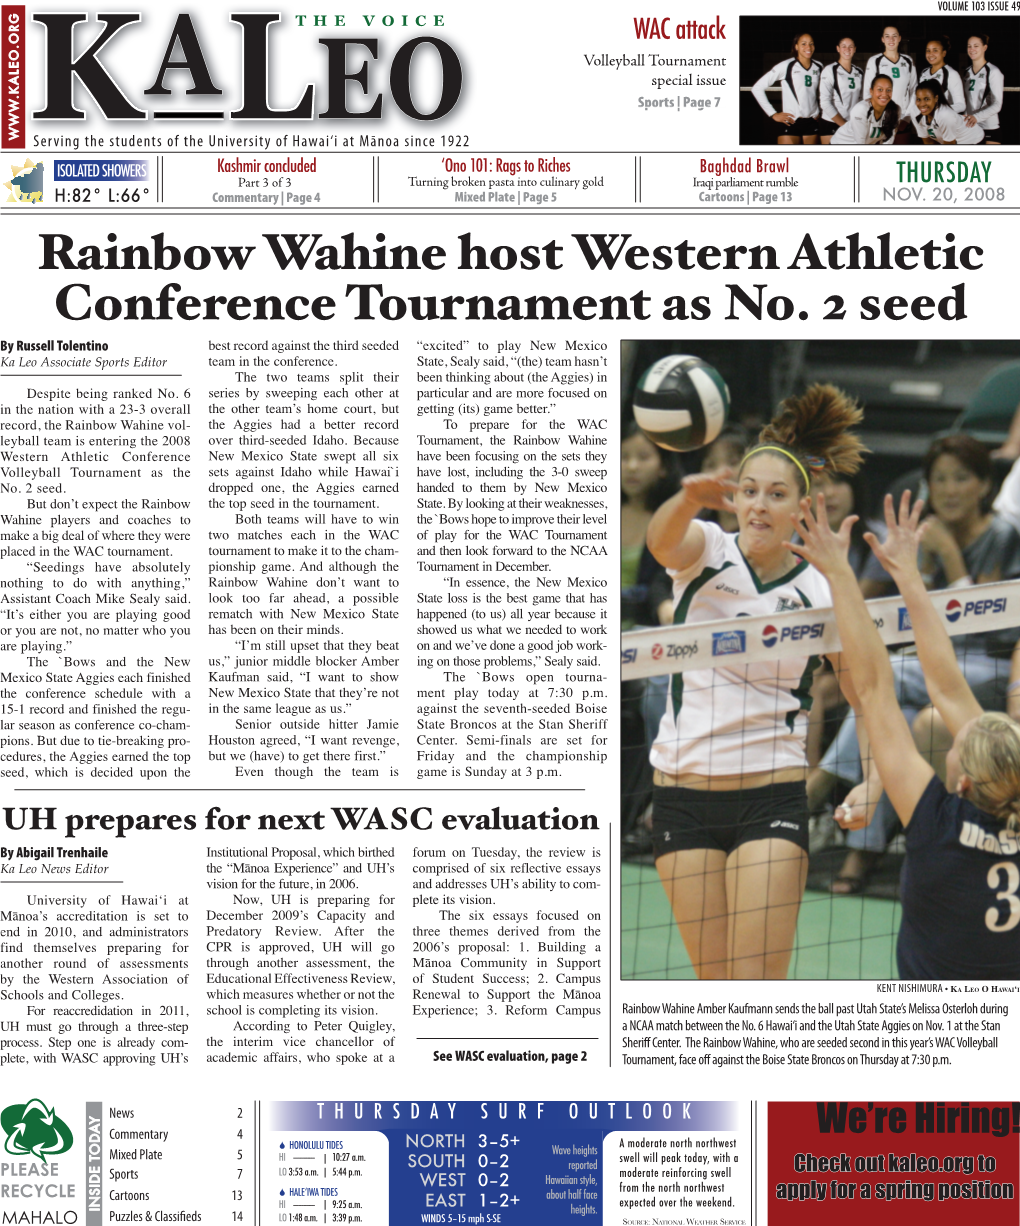 Rainbow Wahine Host Western Athletic Conference Tournament As No